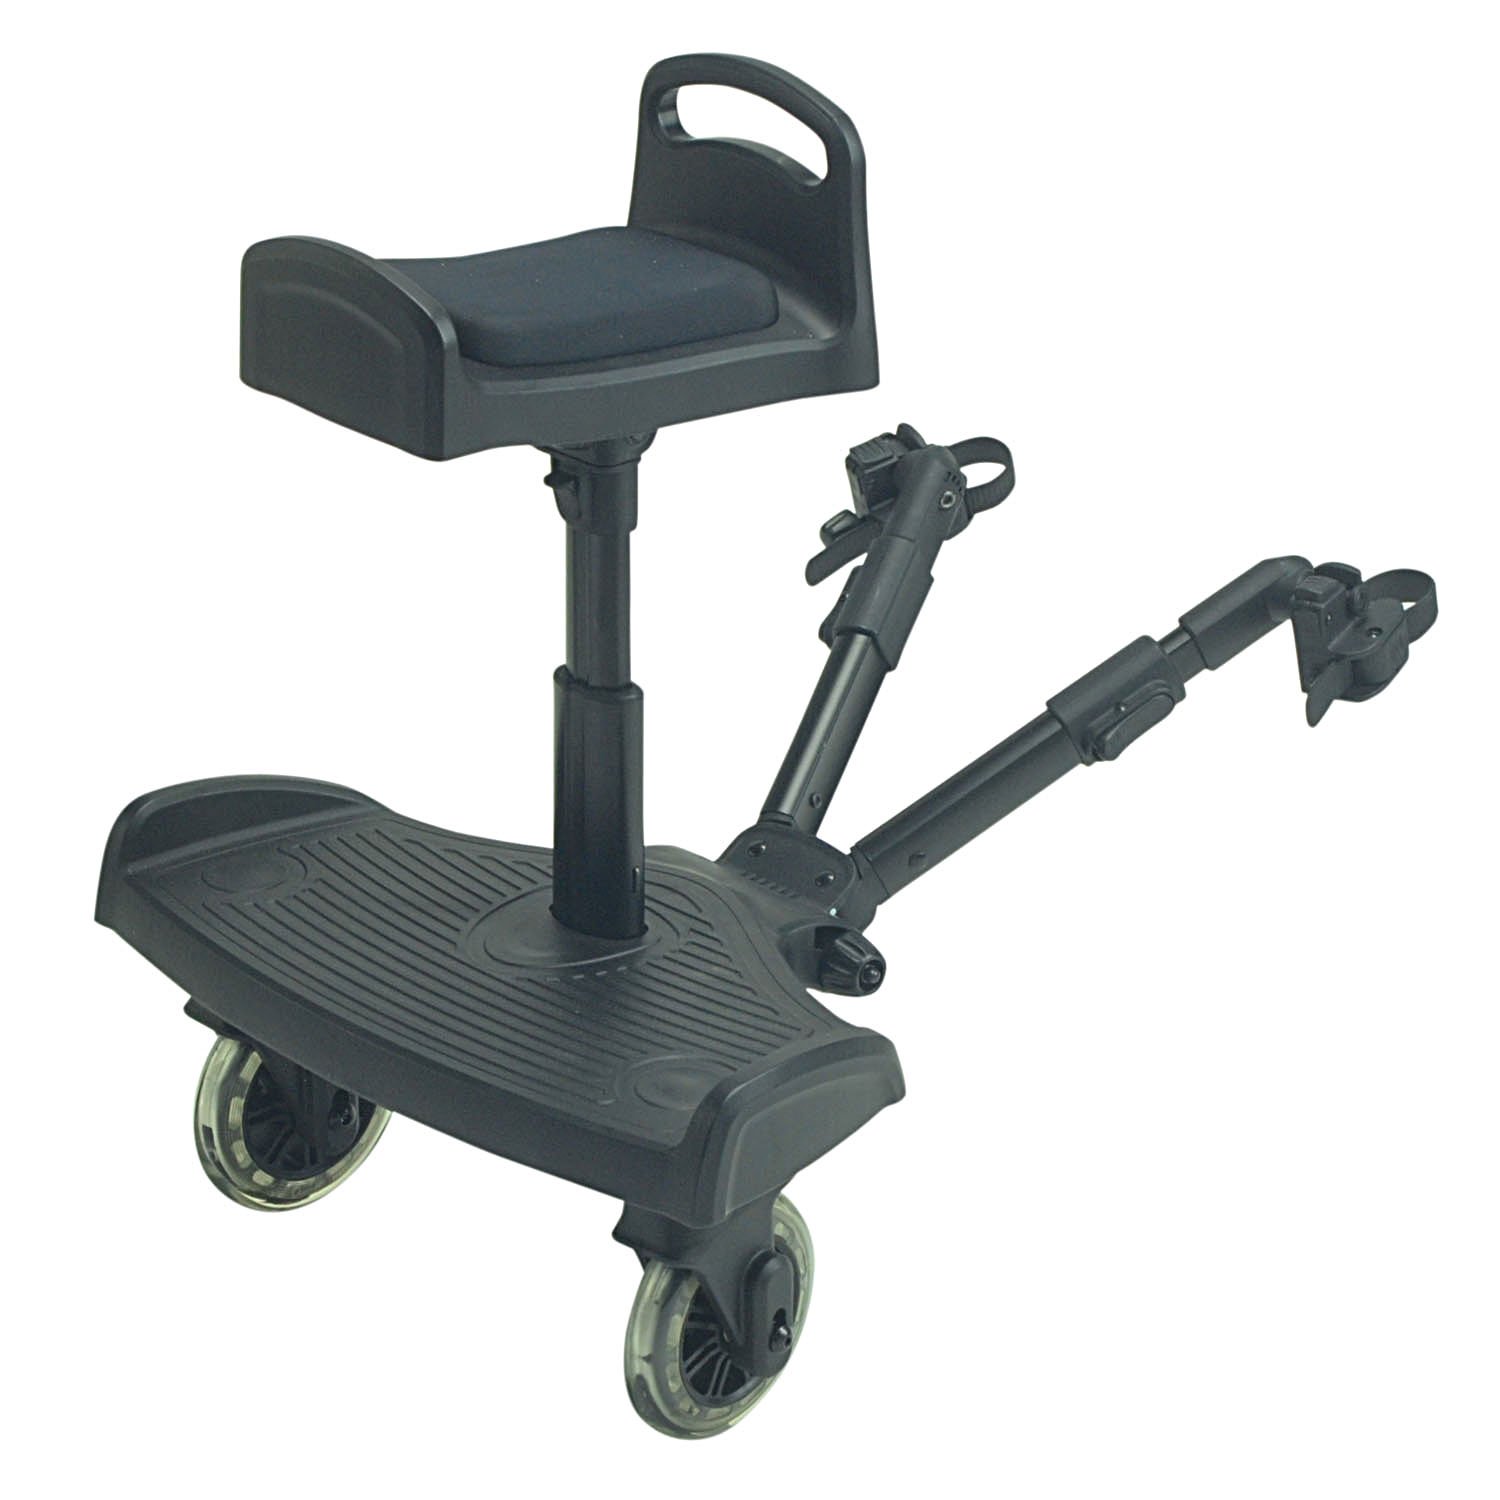 For-Your-Little-Ride On Board Compatible Travel Systems, Cybex Calisto